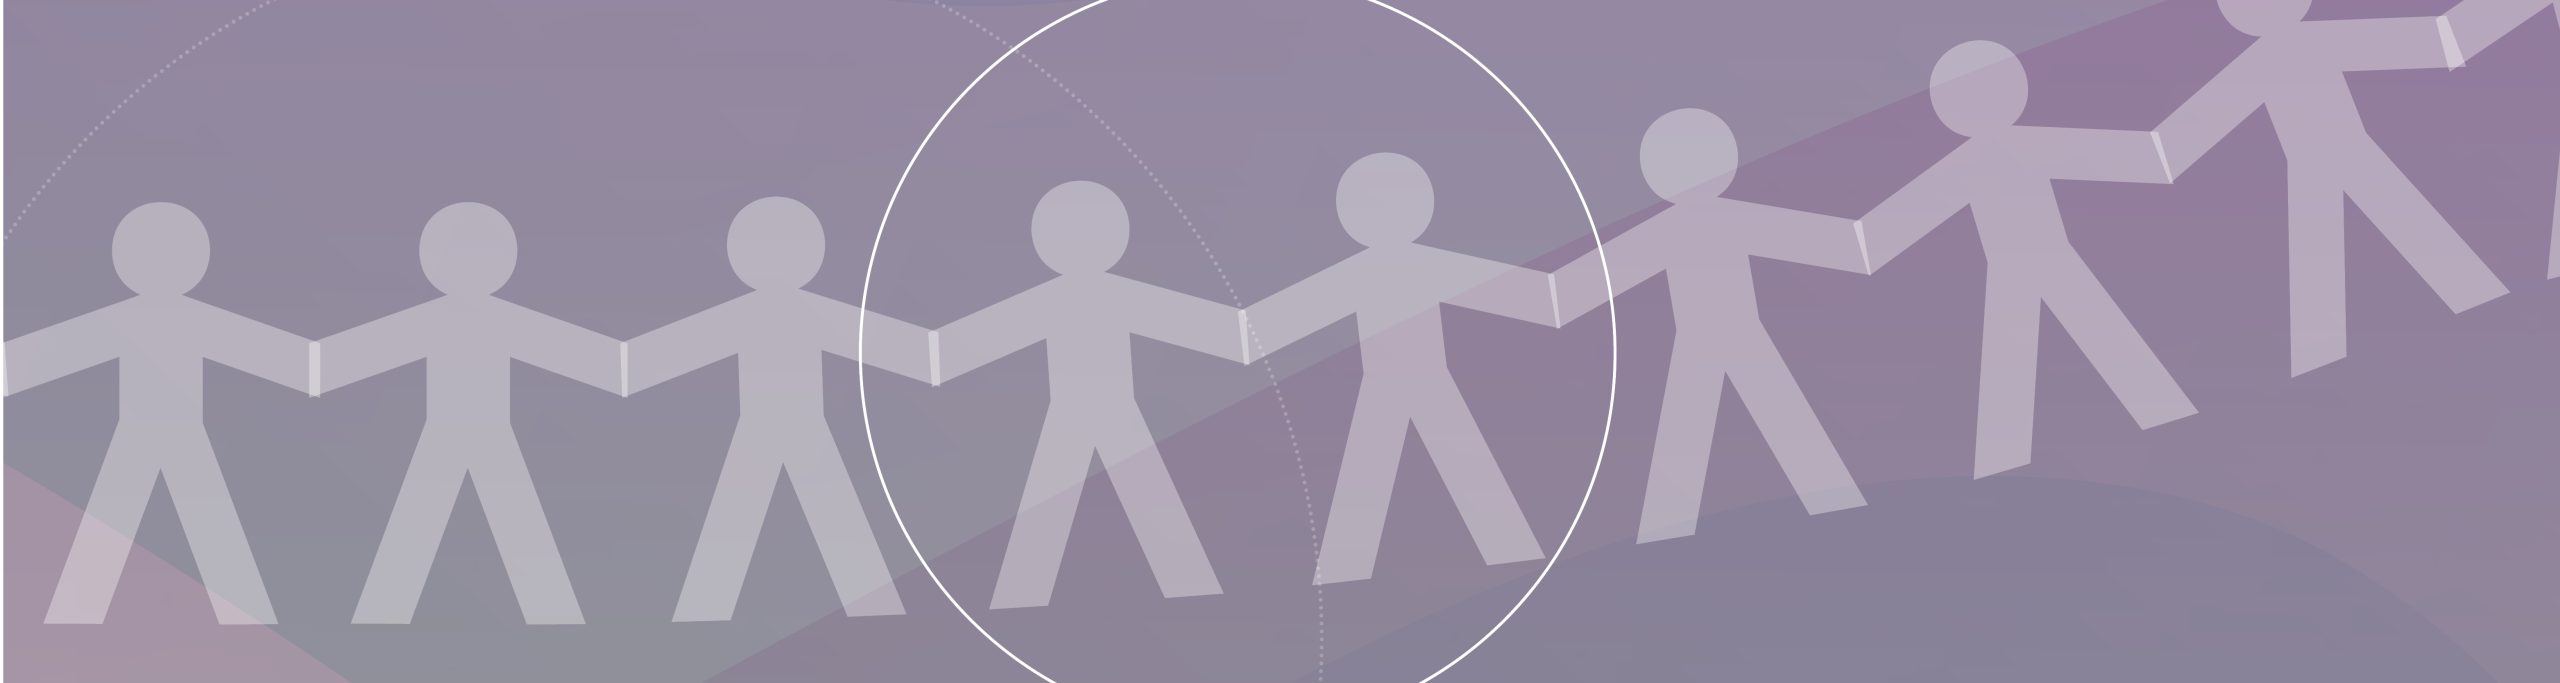 An illustration of a chain of paper people holding hands. Two of the people are circled to indicate they are together.